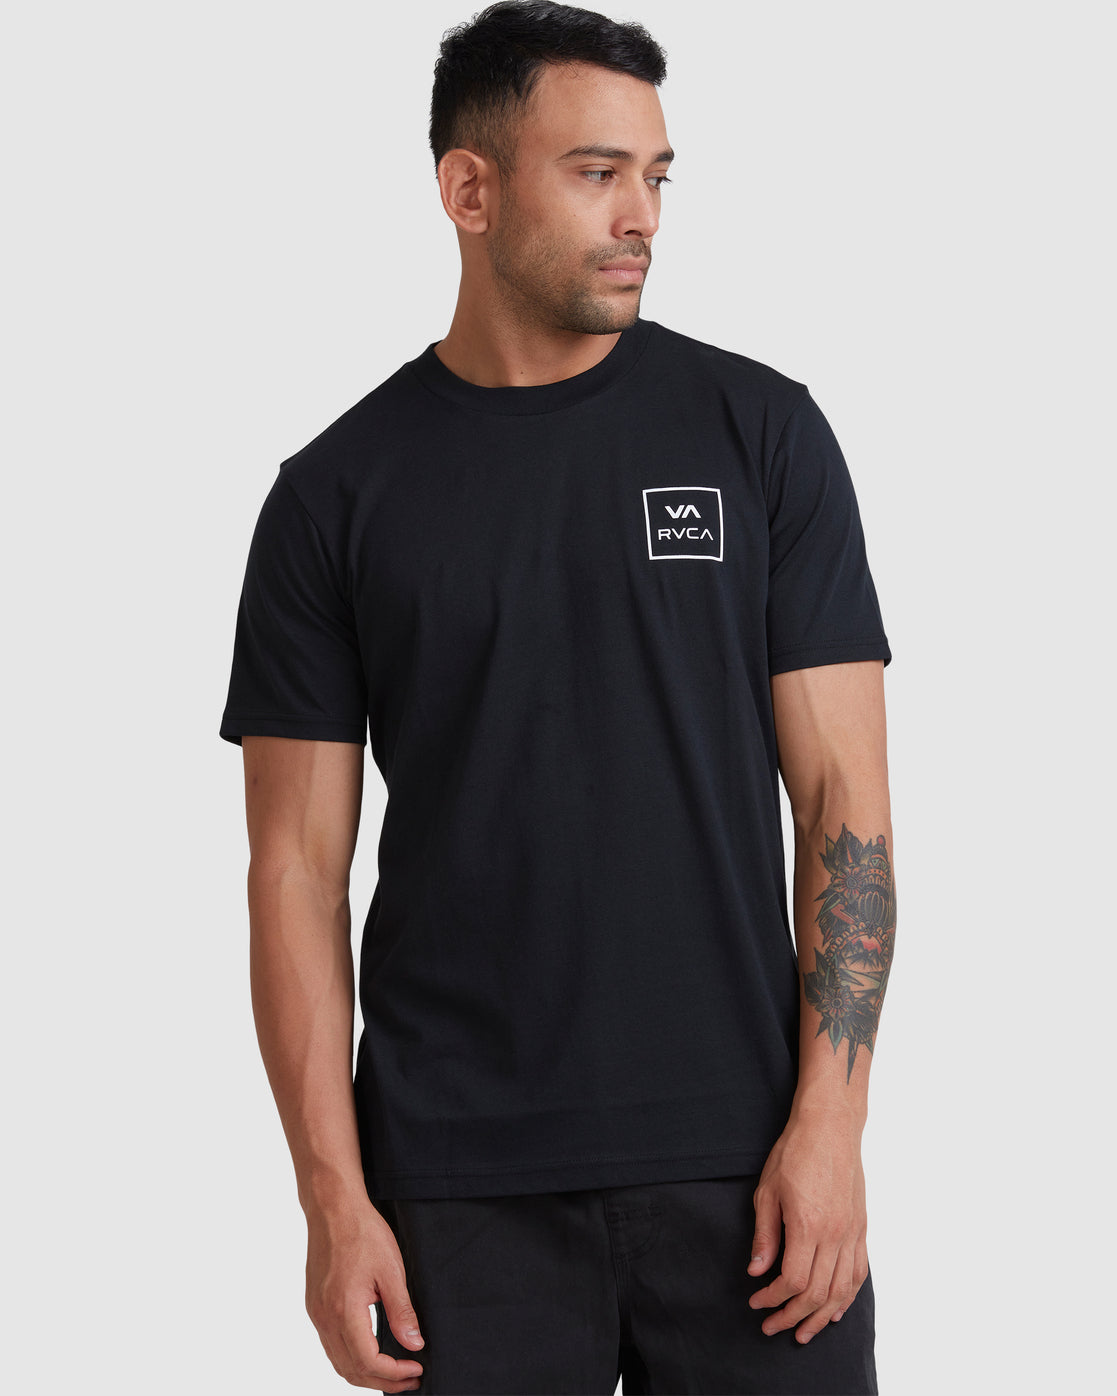 RVCA GOES ALL THE WAYS TEES - BLACK 